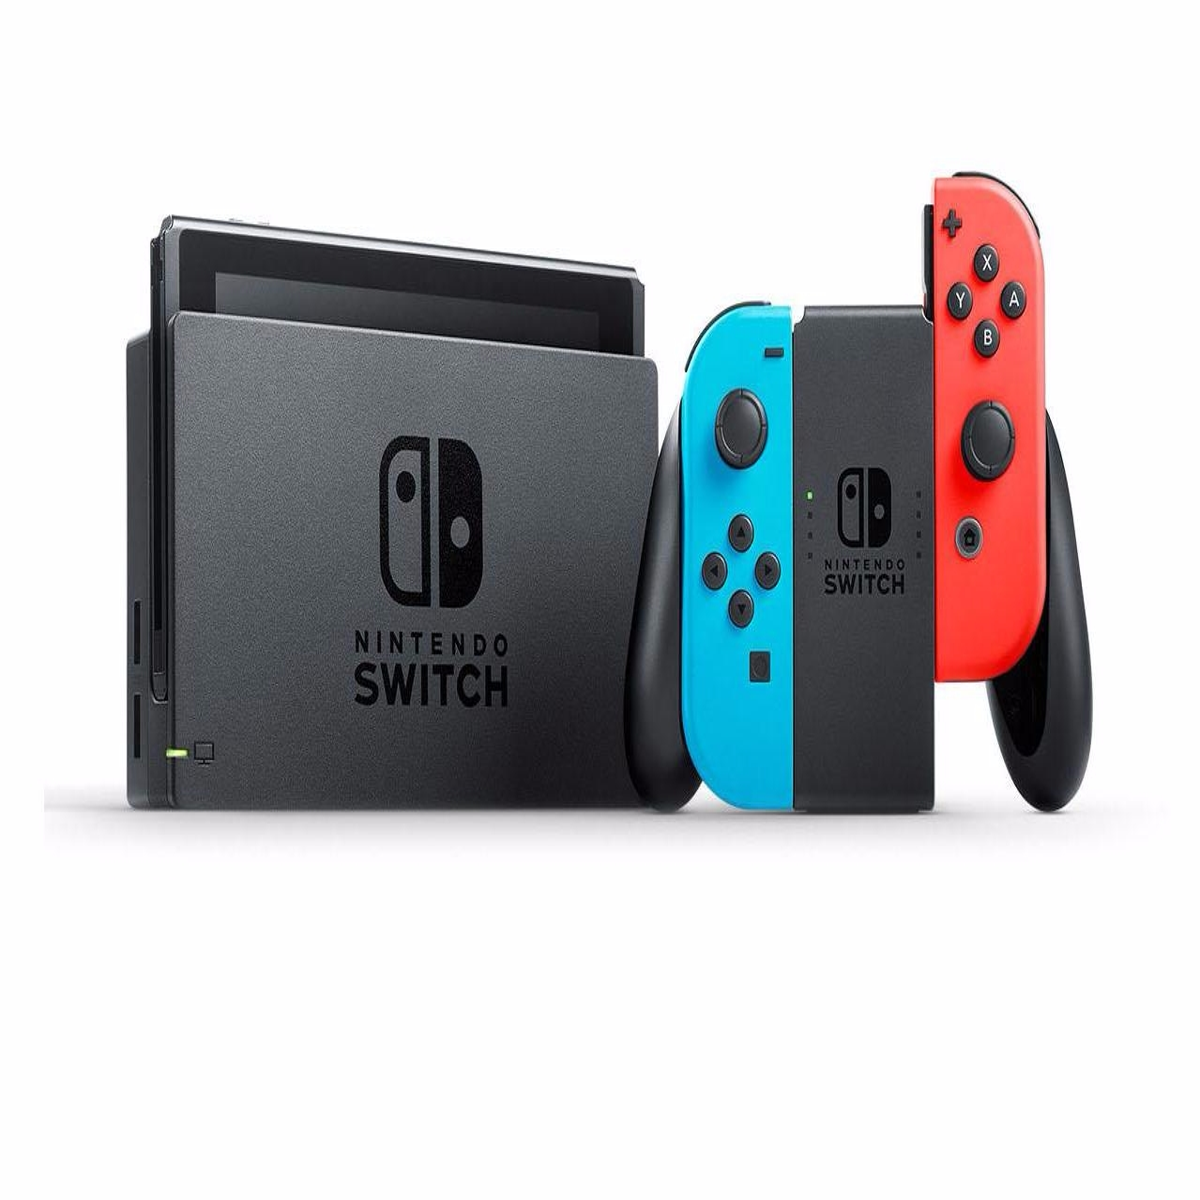 Nintendo Switch OLED White with Super Mario Bros U Deluxe, 128GB Card, and  More 